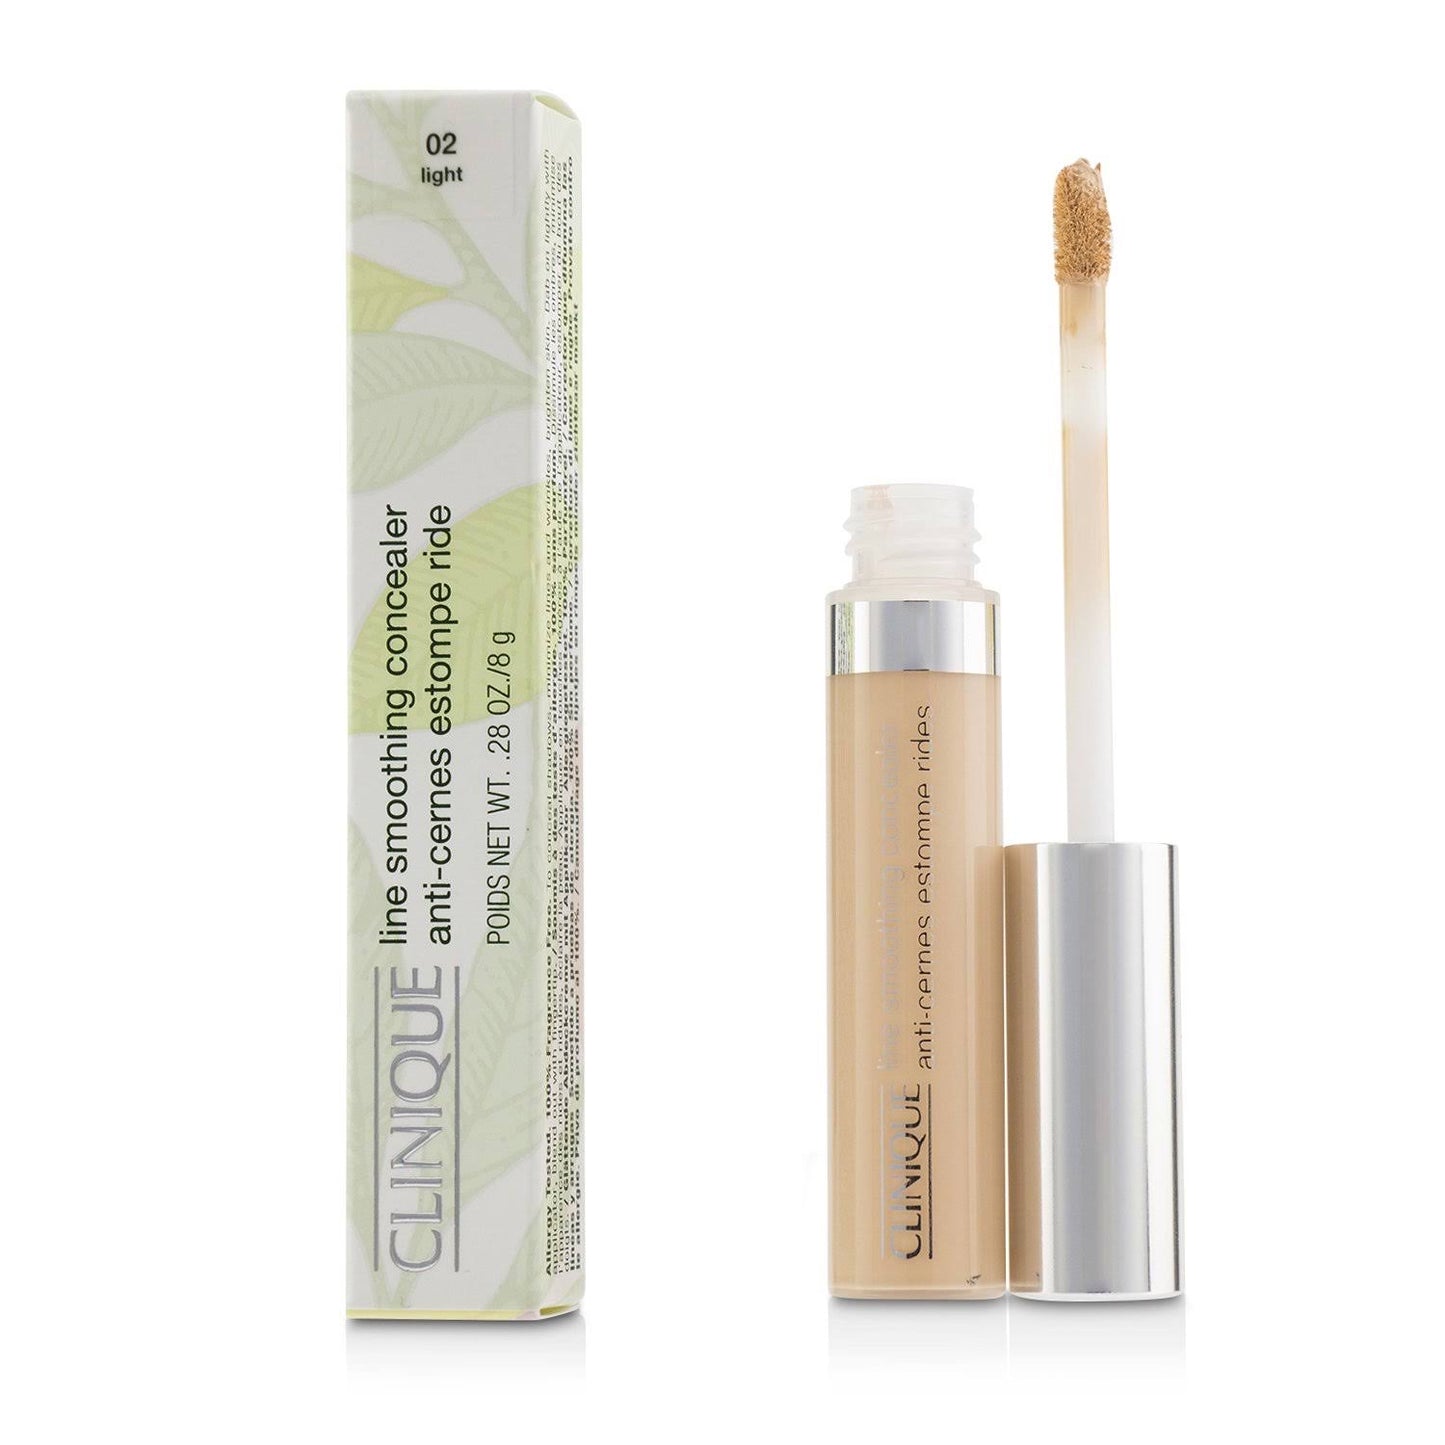 Clinique line smoothing concealer